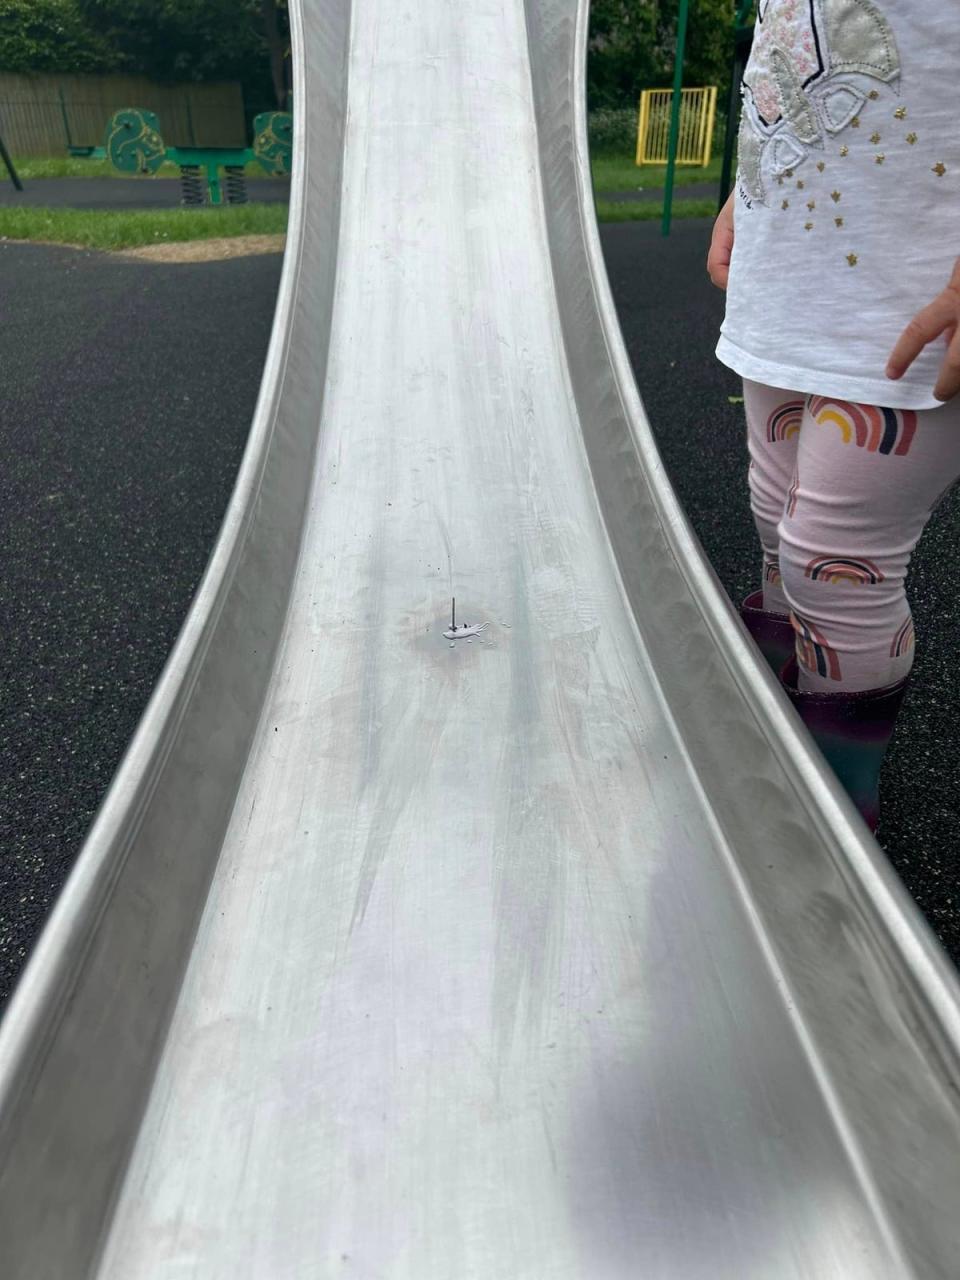 A nail glued to the village slide (Supplied)